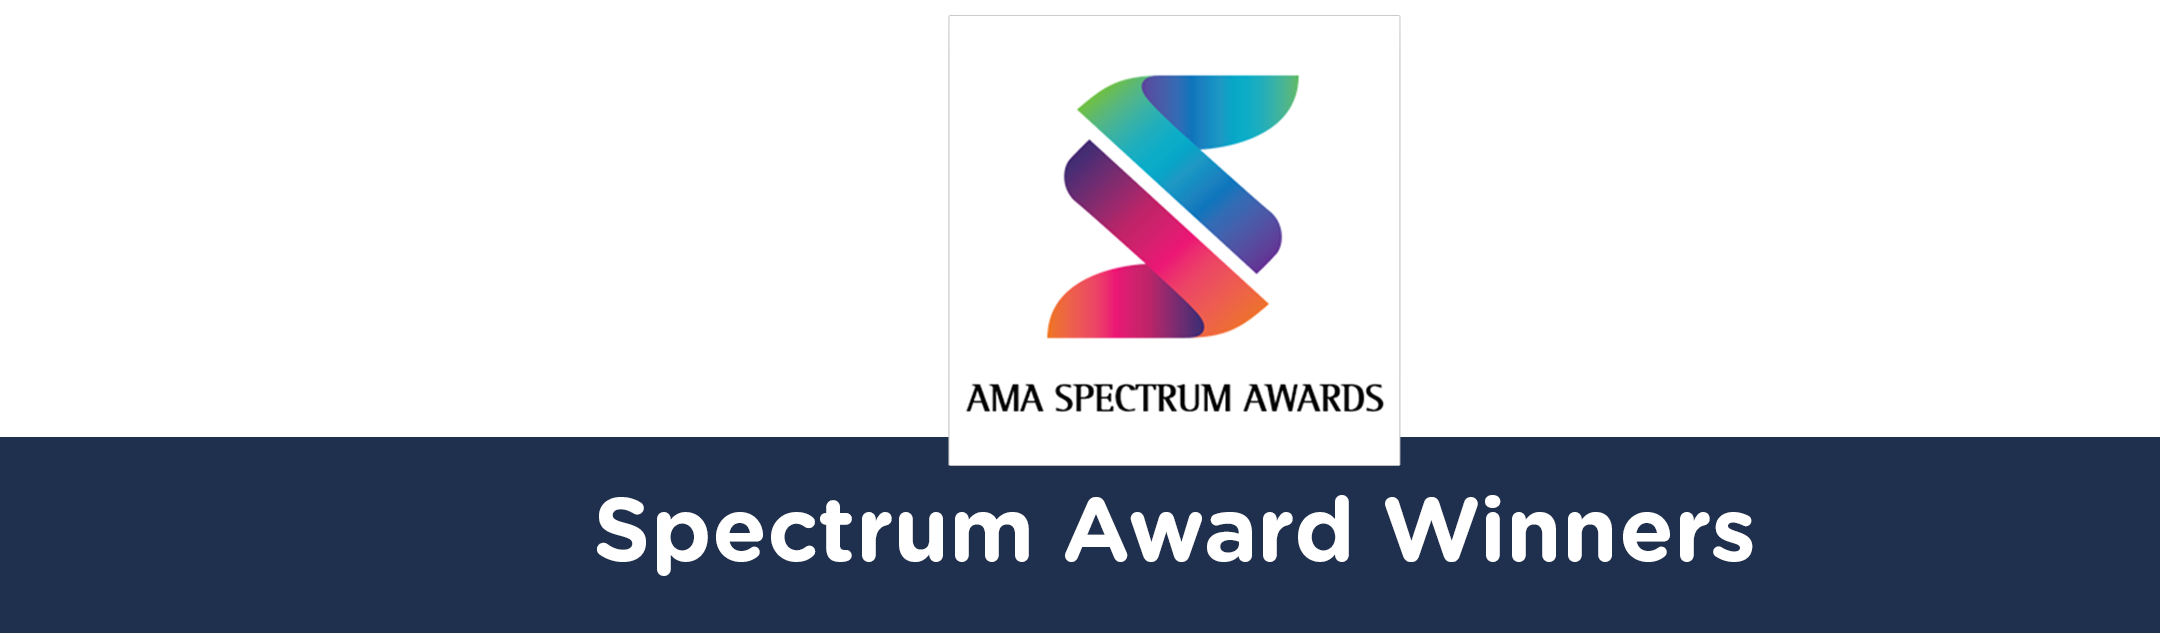 Page header for the AMA Spectrum Awards, Award Winners Page